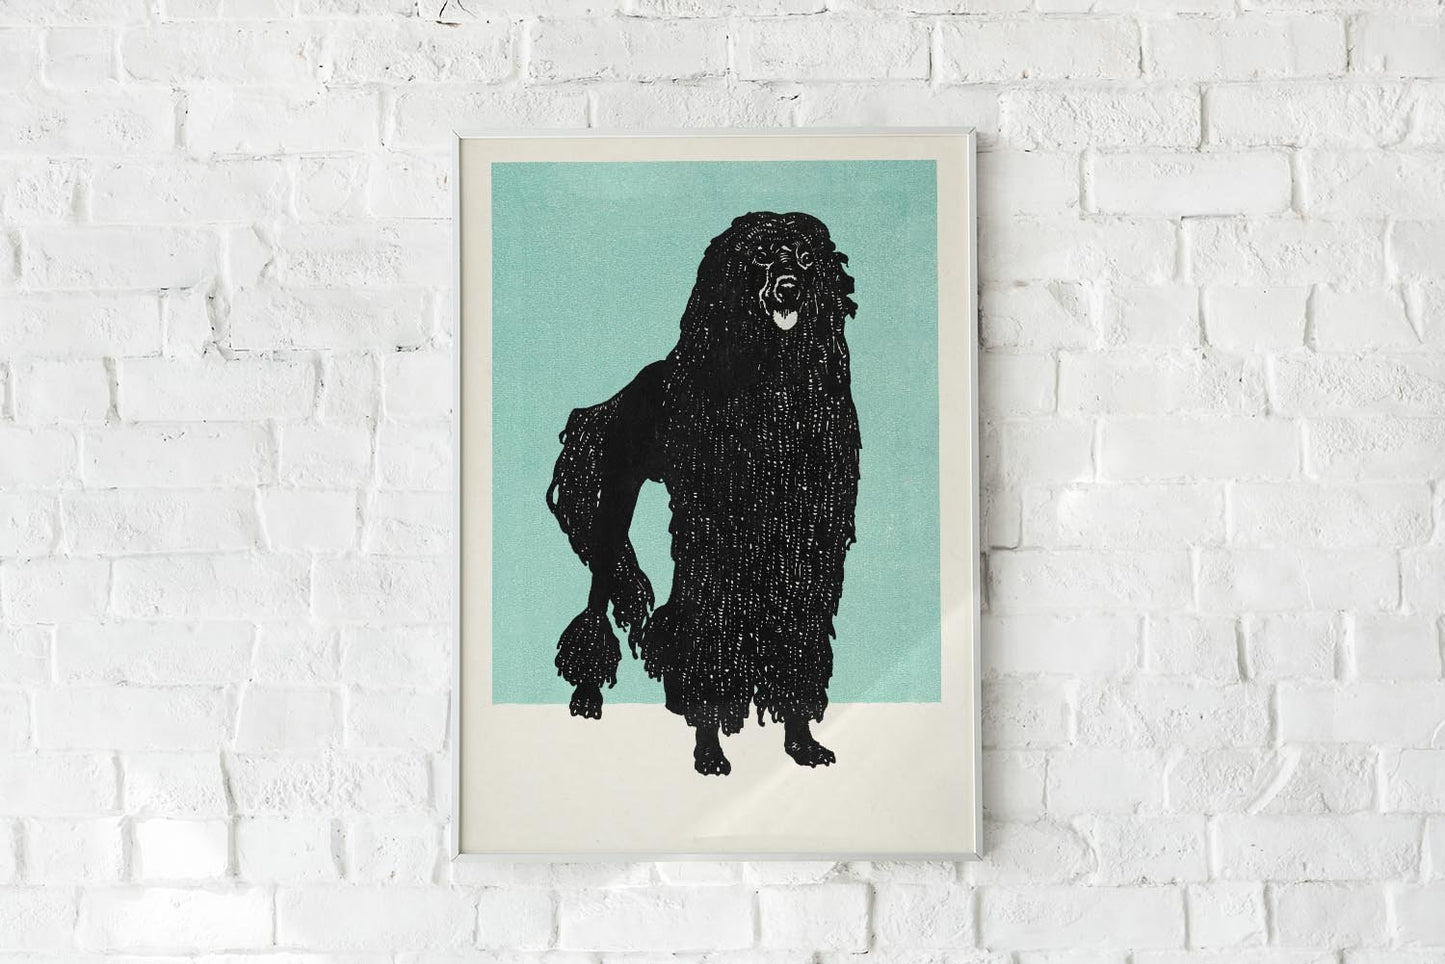 Poodle by Moritz Jung